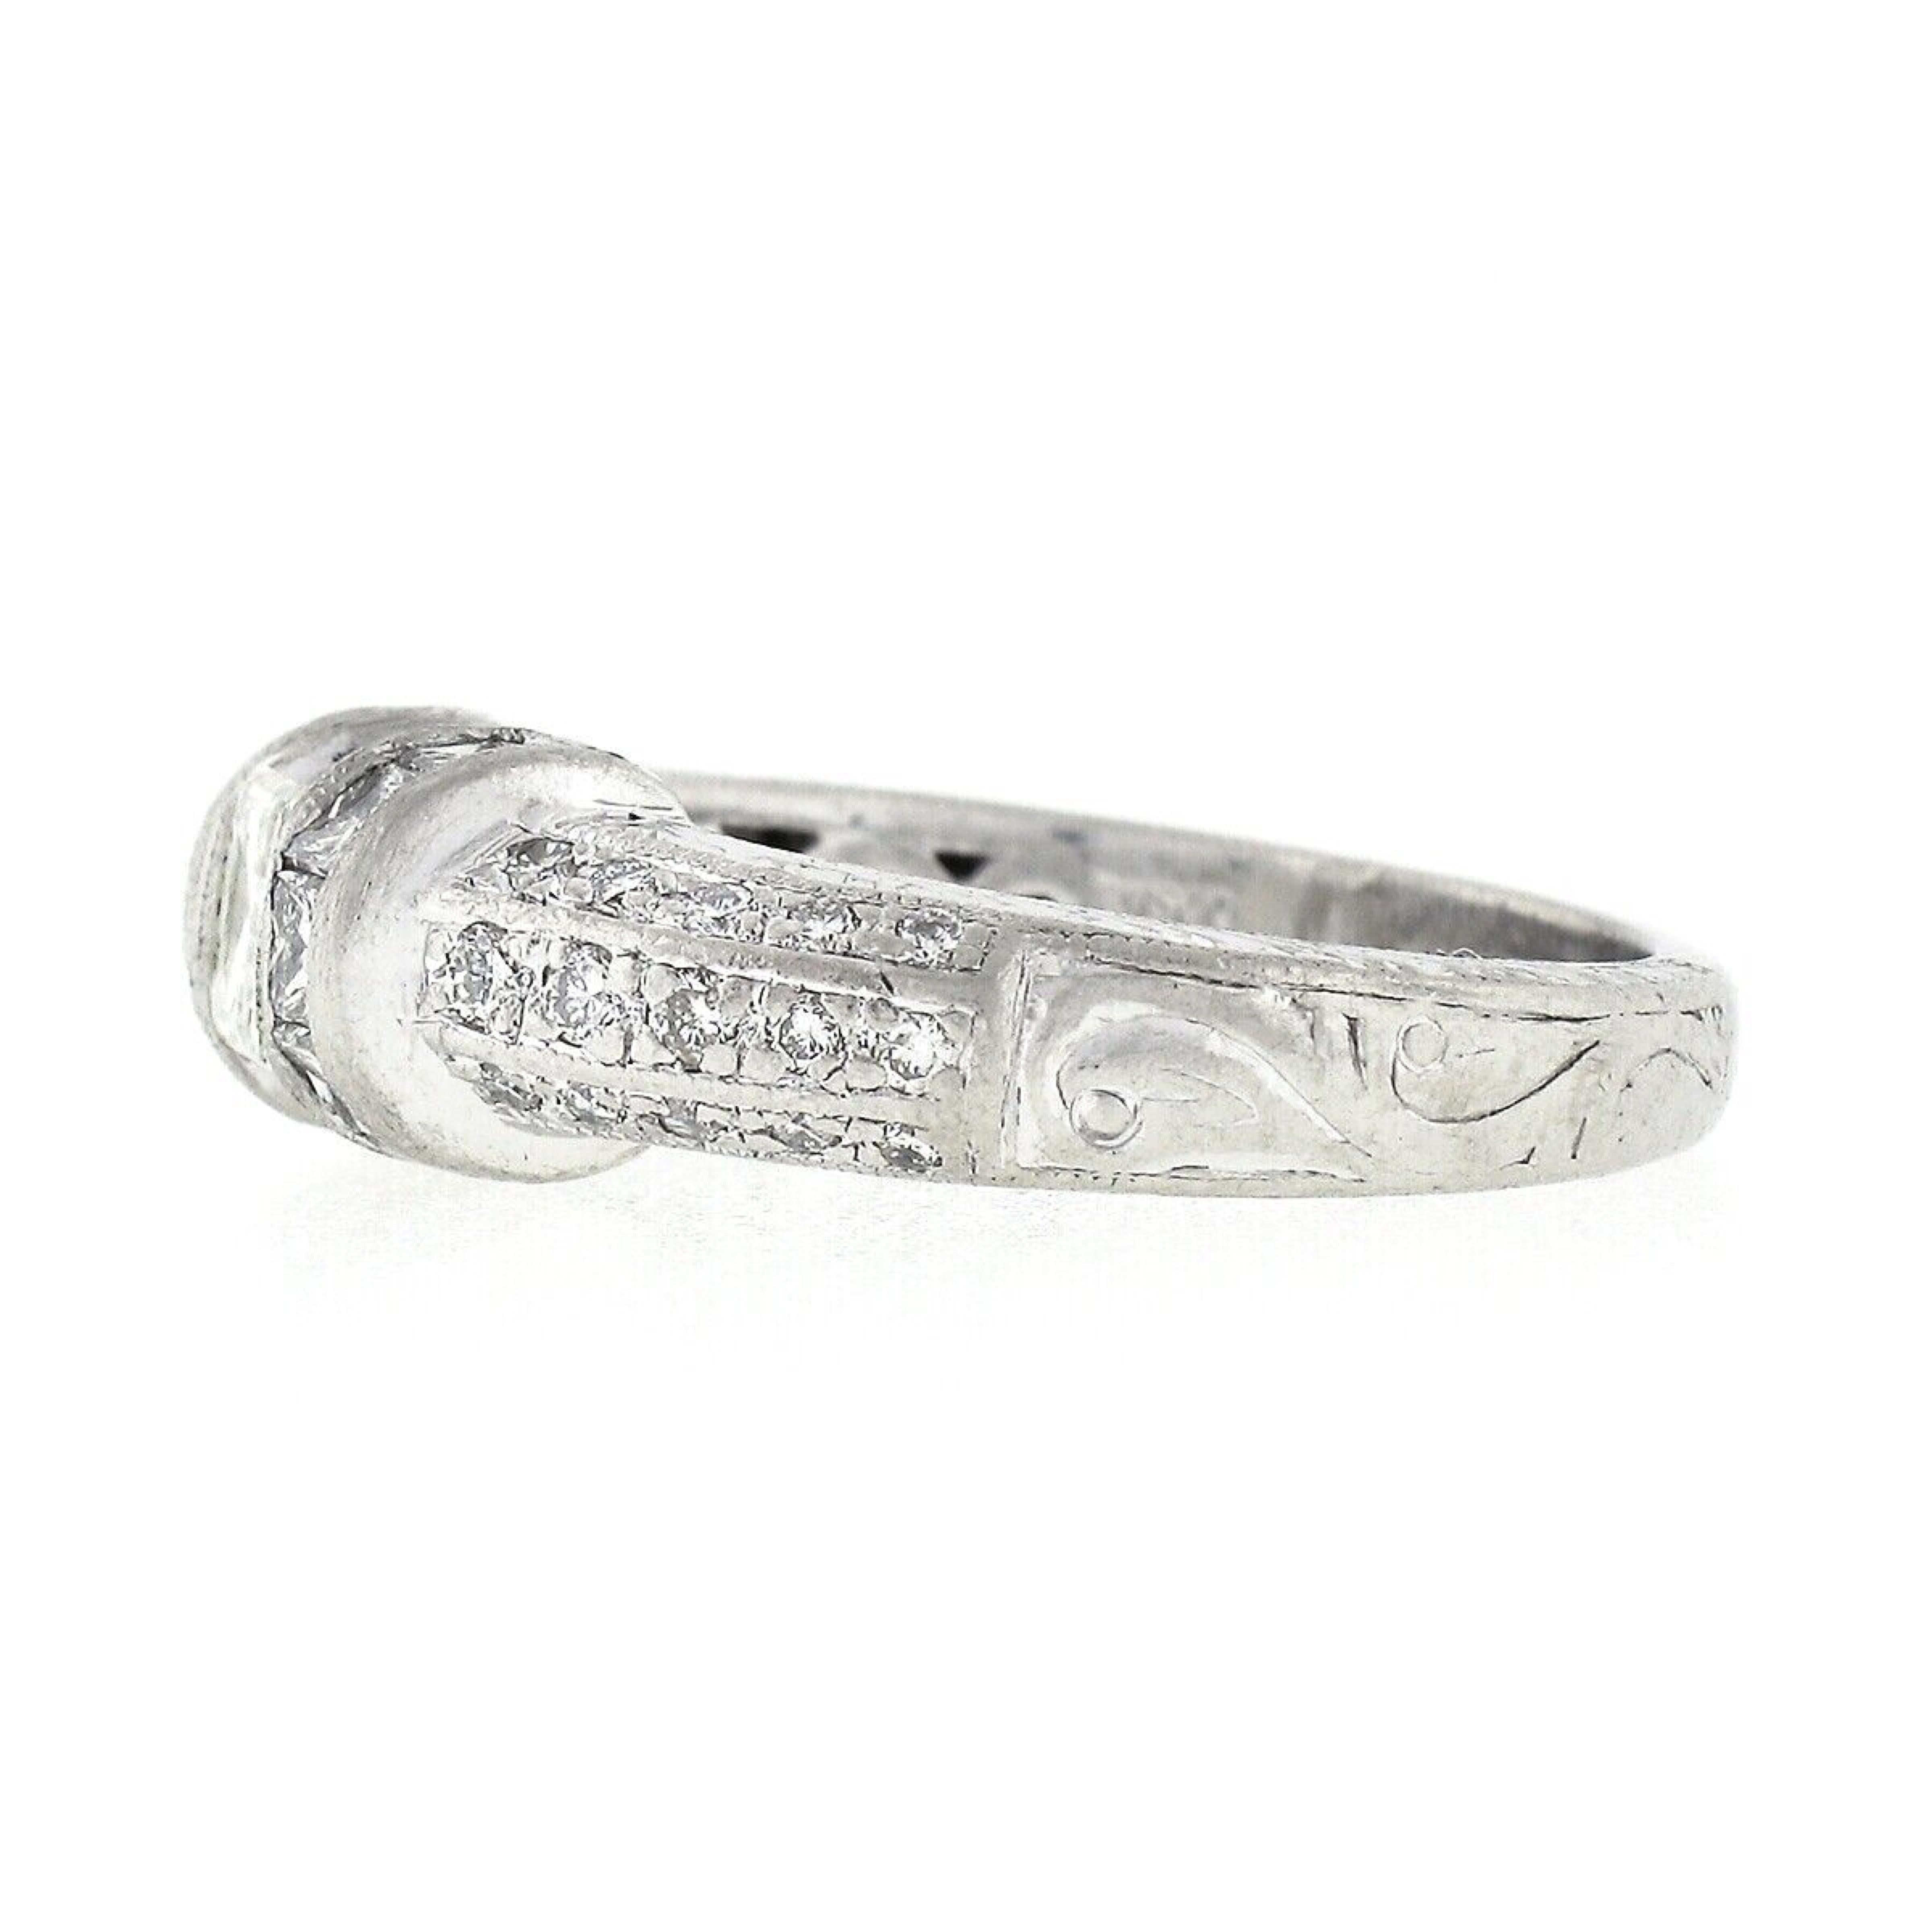 Vintage Platinum 1.35ct Floating Diamond W/ Accents Hand Engraved Work Band Ring For Sale 1